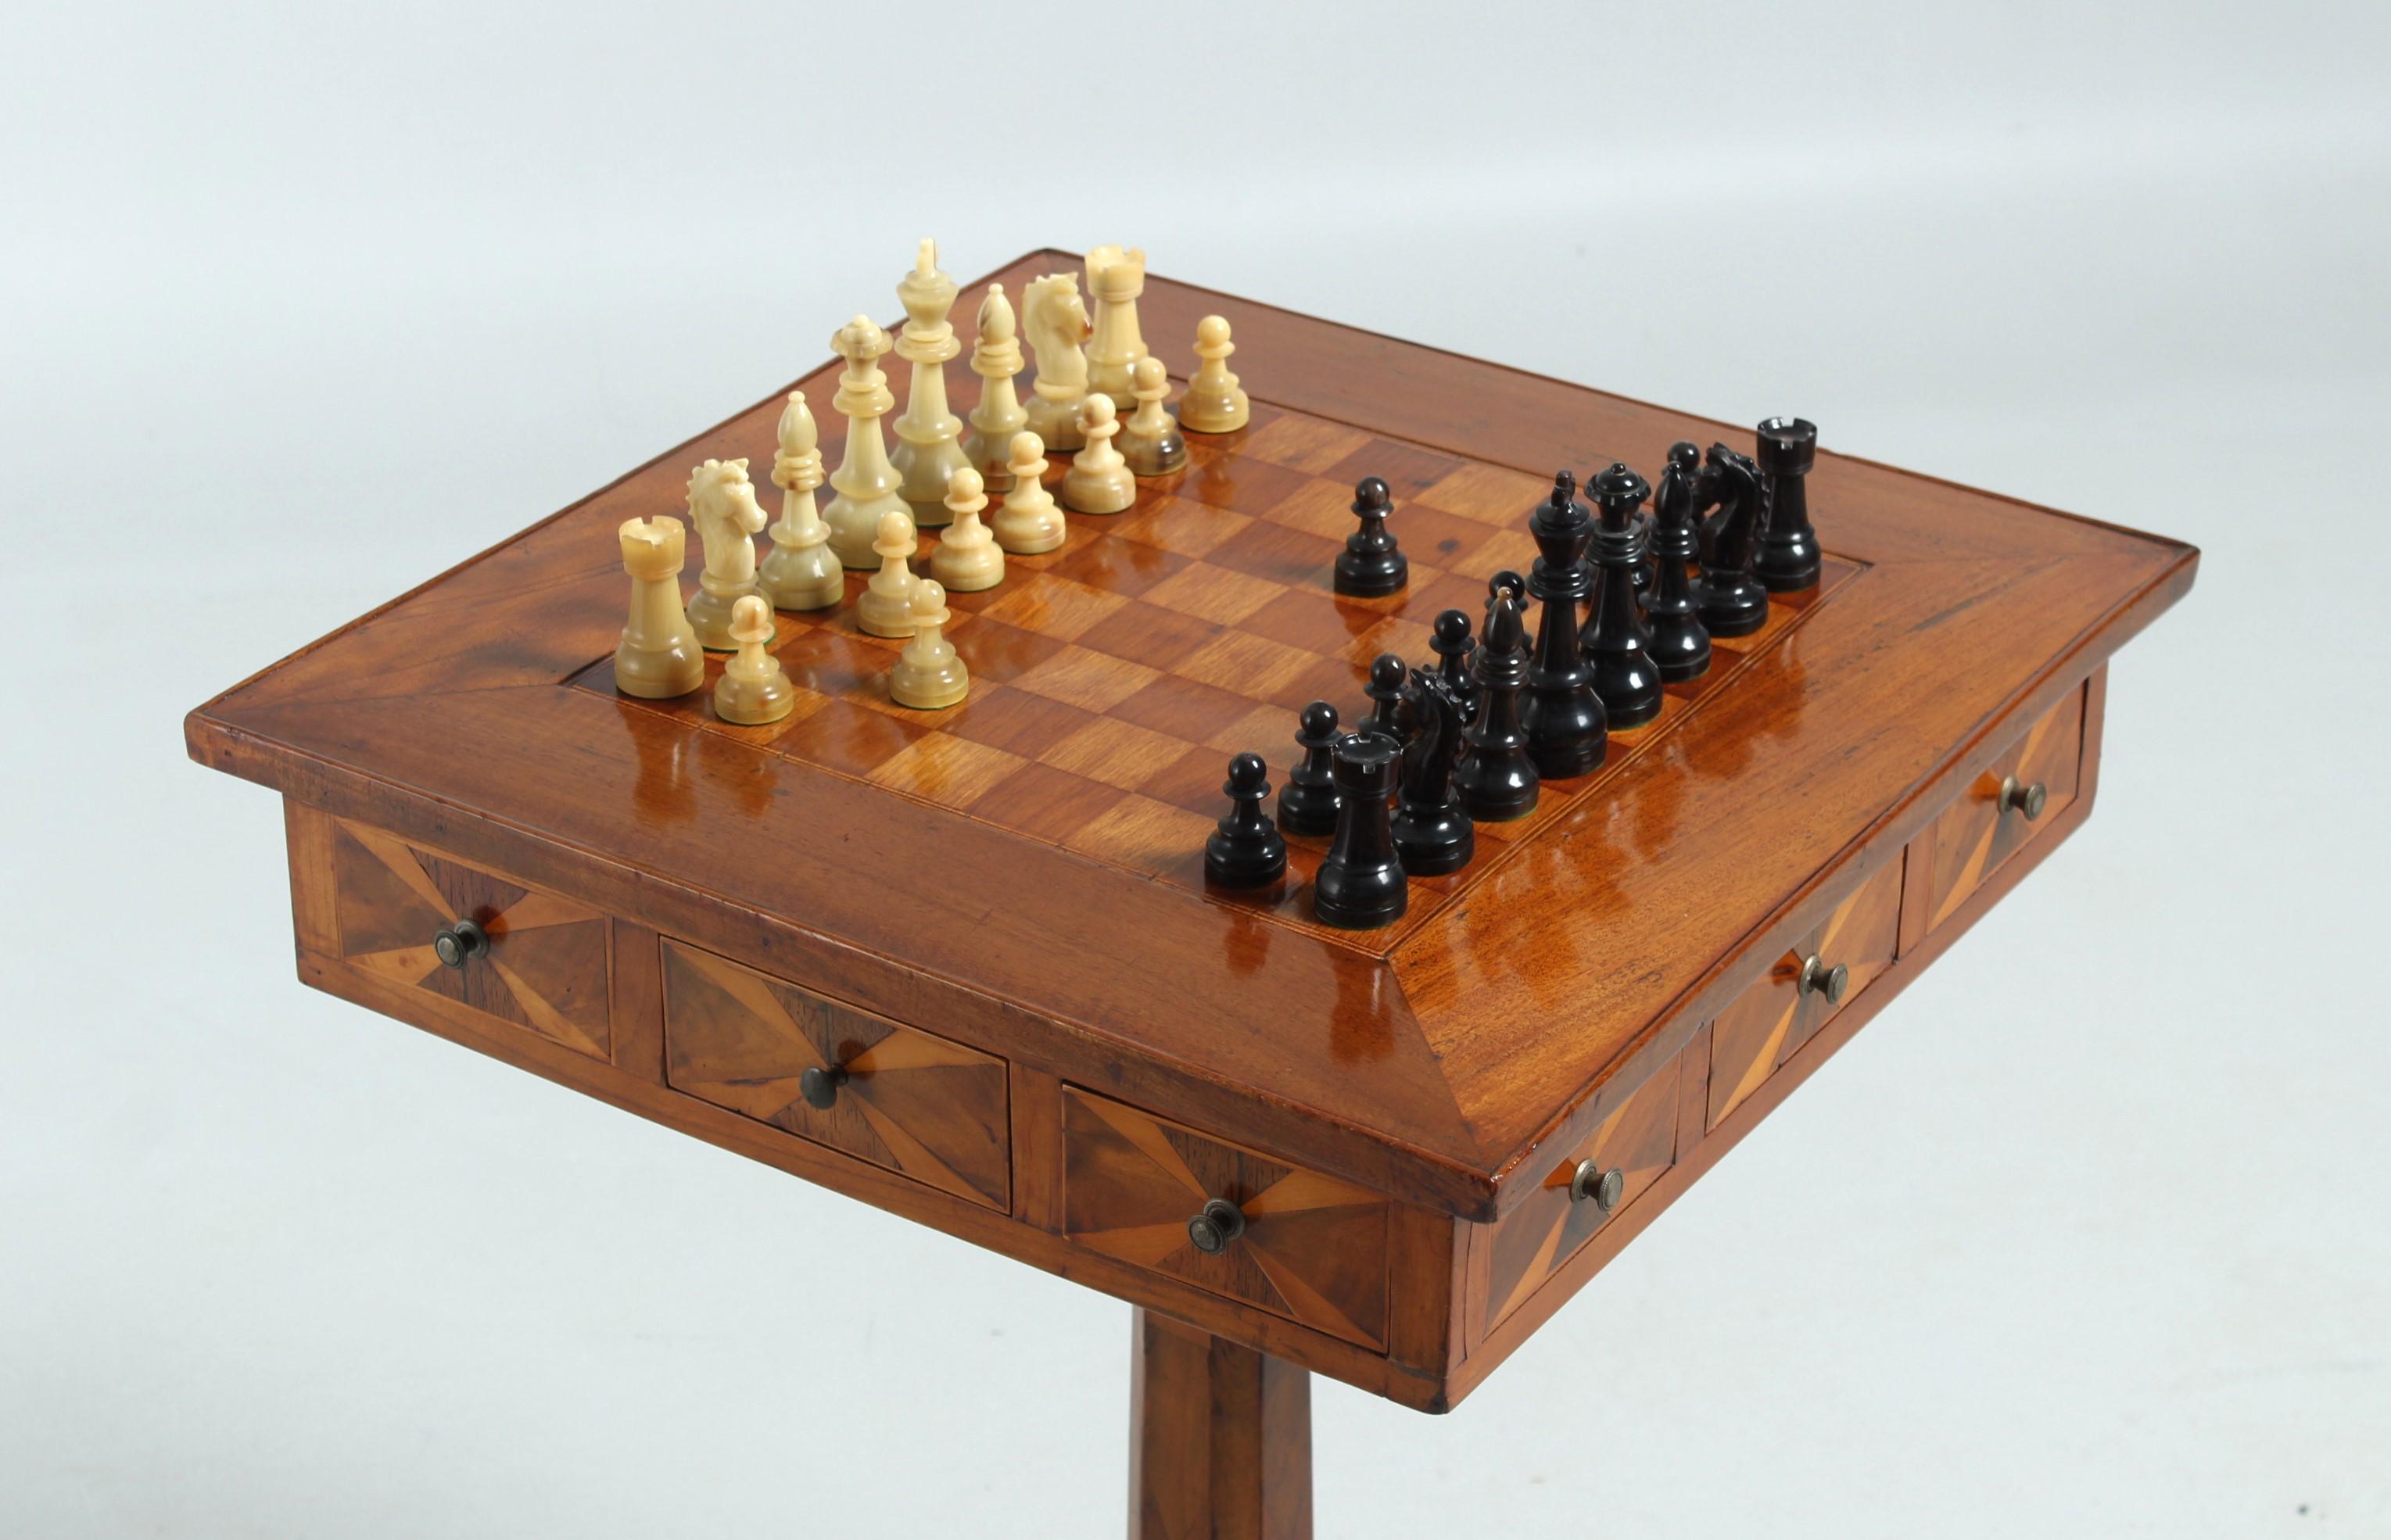 Antique chess table

Southern Germany
Walnut, cherry tree
19th century

Dimensions: H x W x D: 70 x 49 x 49 cm

Description:
Piece of furniture standing on a three-piece base with a centrally mounted table leg.

The square table top